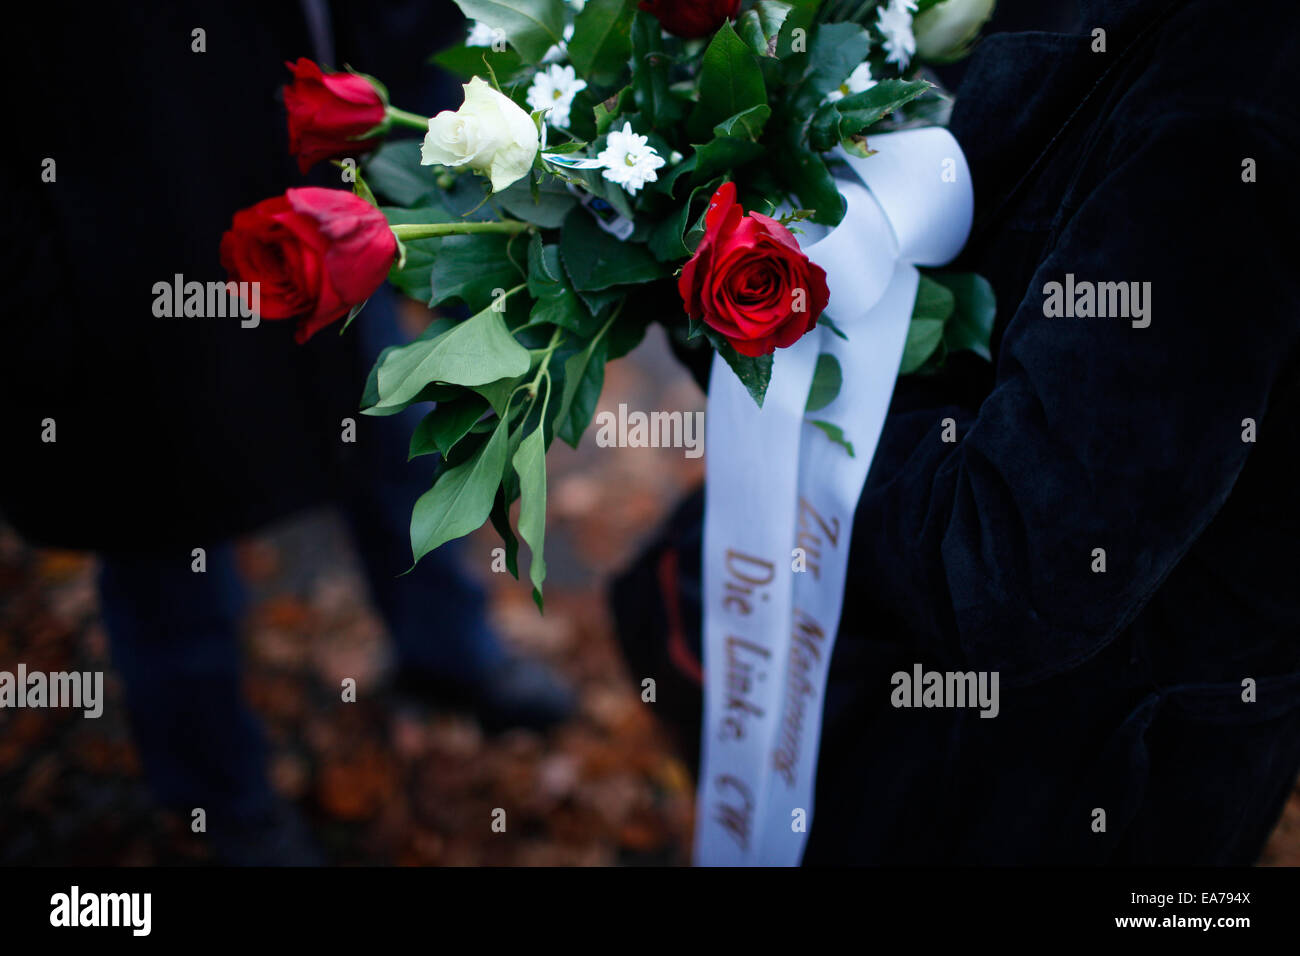 Berlin, Germany. 7th Nov, 2014. People holding flowers gather near Berlin's Grunewald train station to attend a memorial activity for the Crystal Night in Berlin, Germany, on Nov. 7, 2014. Some 100 middle school students and students from the local police school took part in the memorial activity on Friday to commemorate the 76th anniversary of the Nazi's 'Kristallnacht' (Crystal Night, Night of Broken Glass) in 1938, at Berlin's Grunewald train station, one of the major sites of deportation of the Berlin Jews during World War II. Credit:  Zhang Fan/Xinhua/Alamy Live News Stock Photo